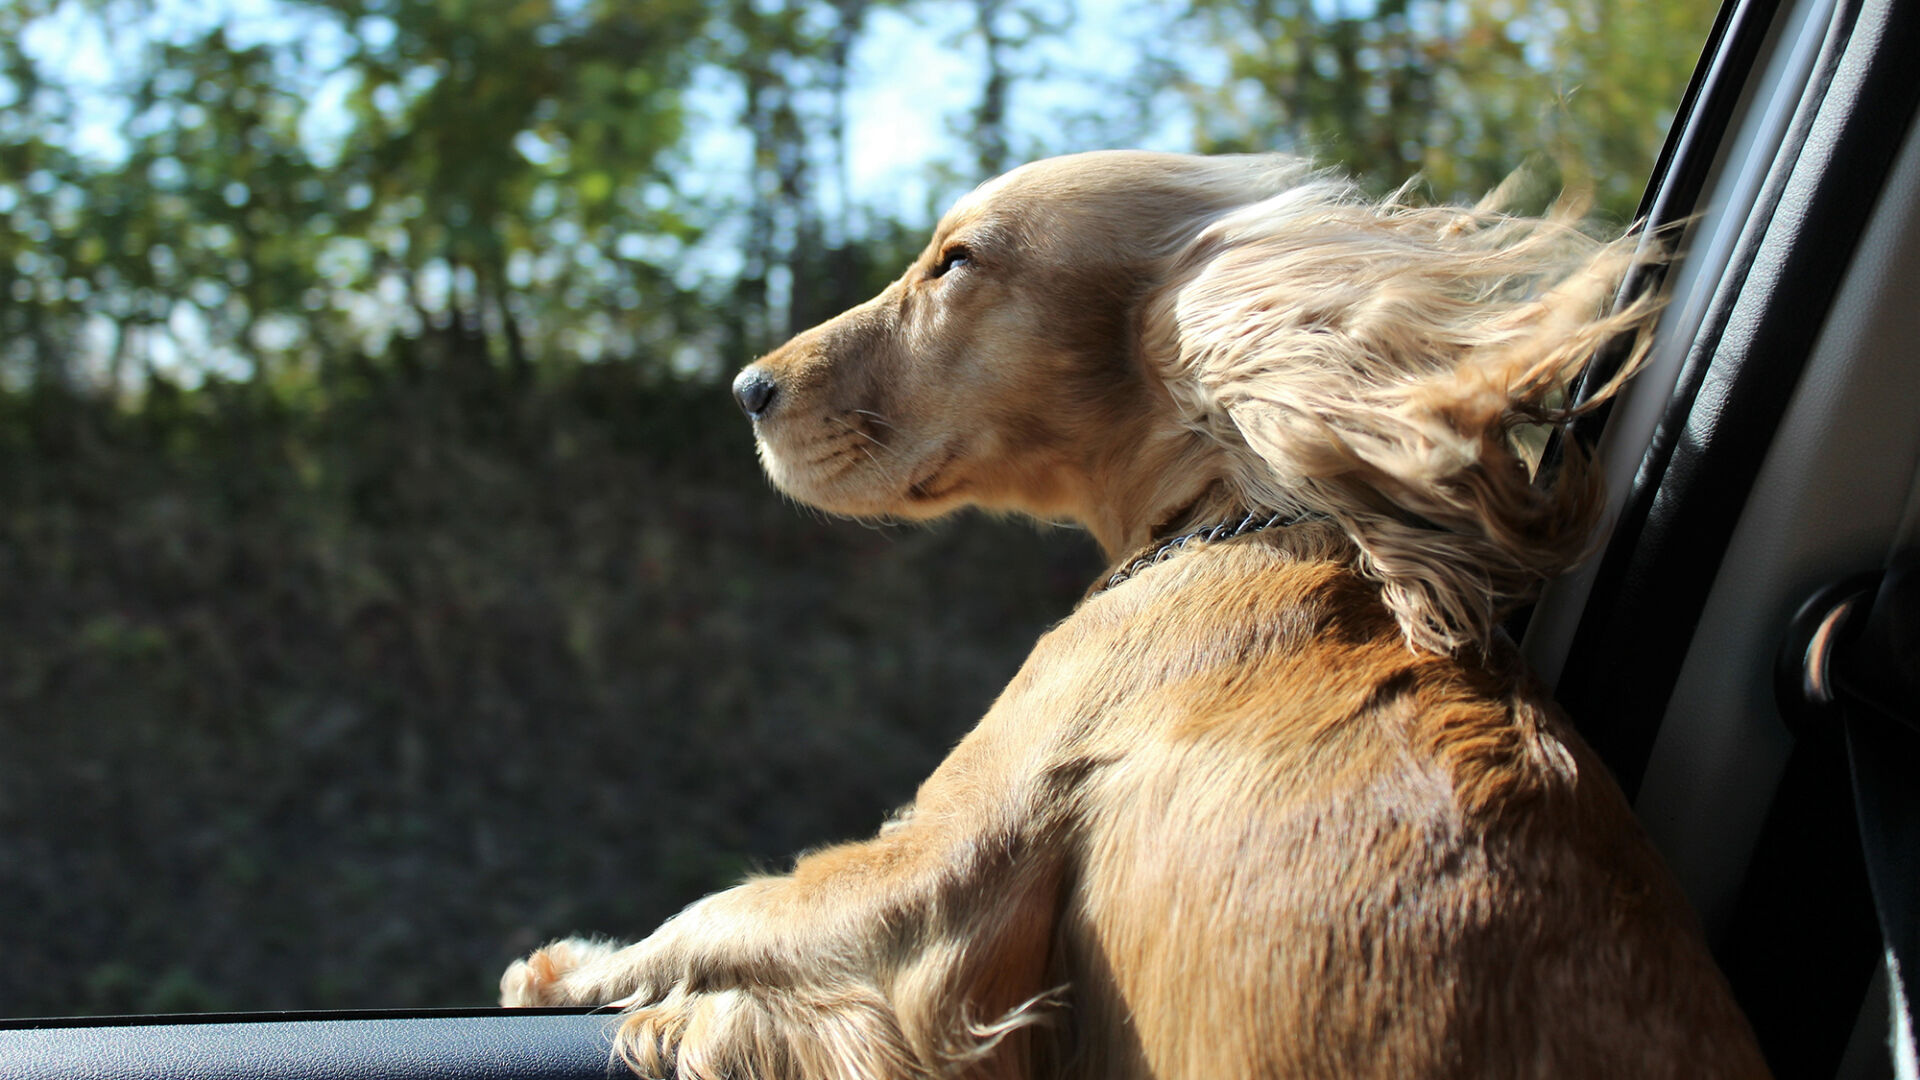 Florida animal welfare bill would ban dogs from sticking heads out car window News wsiltv